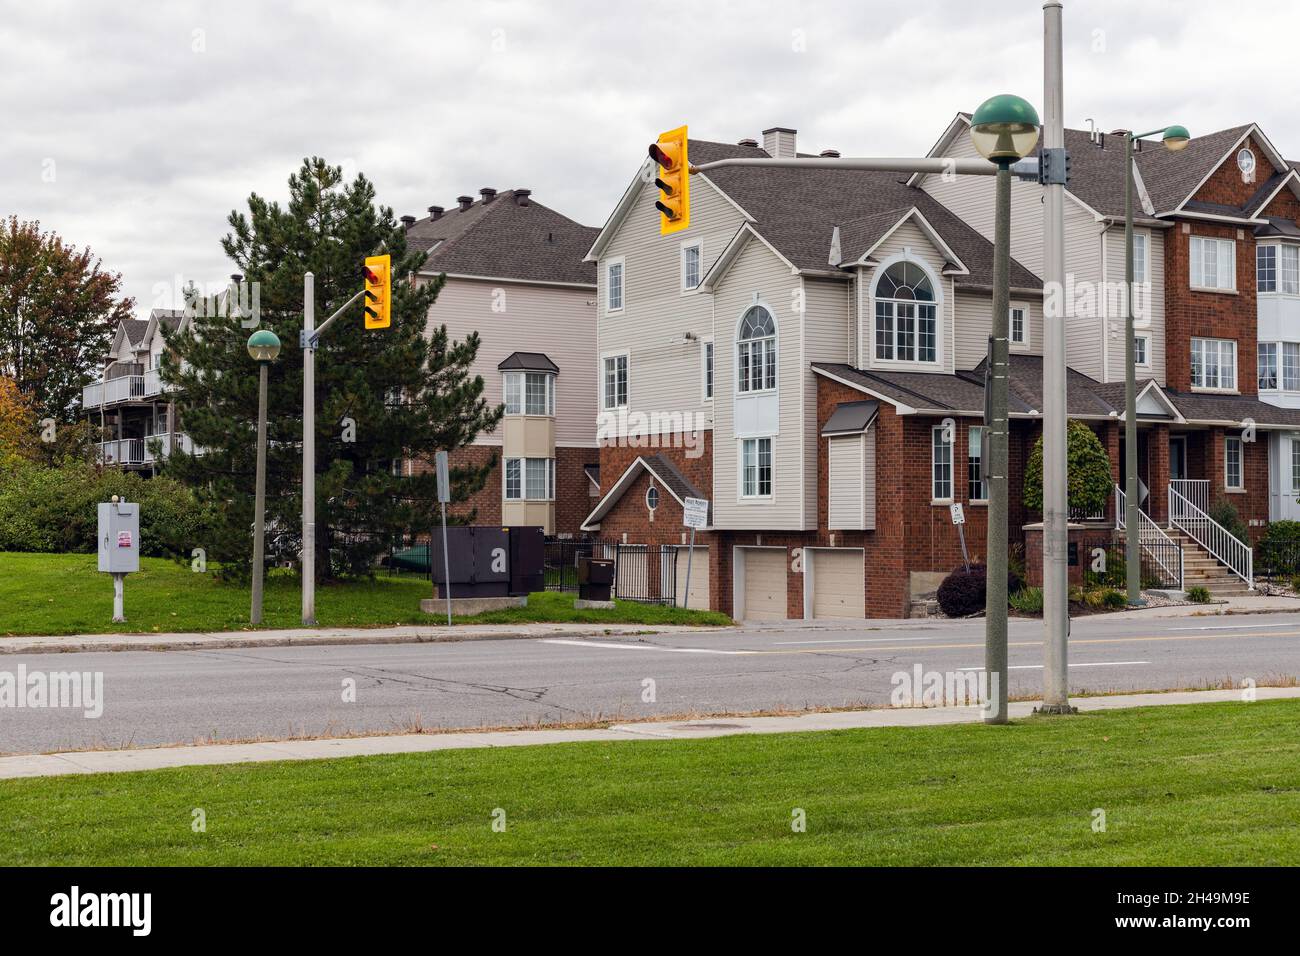 Street with houses and traffic lights at pedestrian crossing in Ottawa, Canada Stock Photo